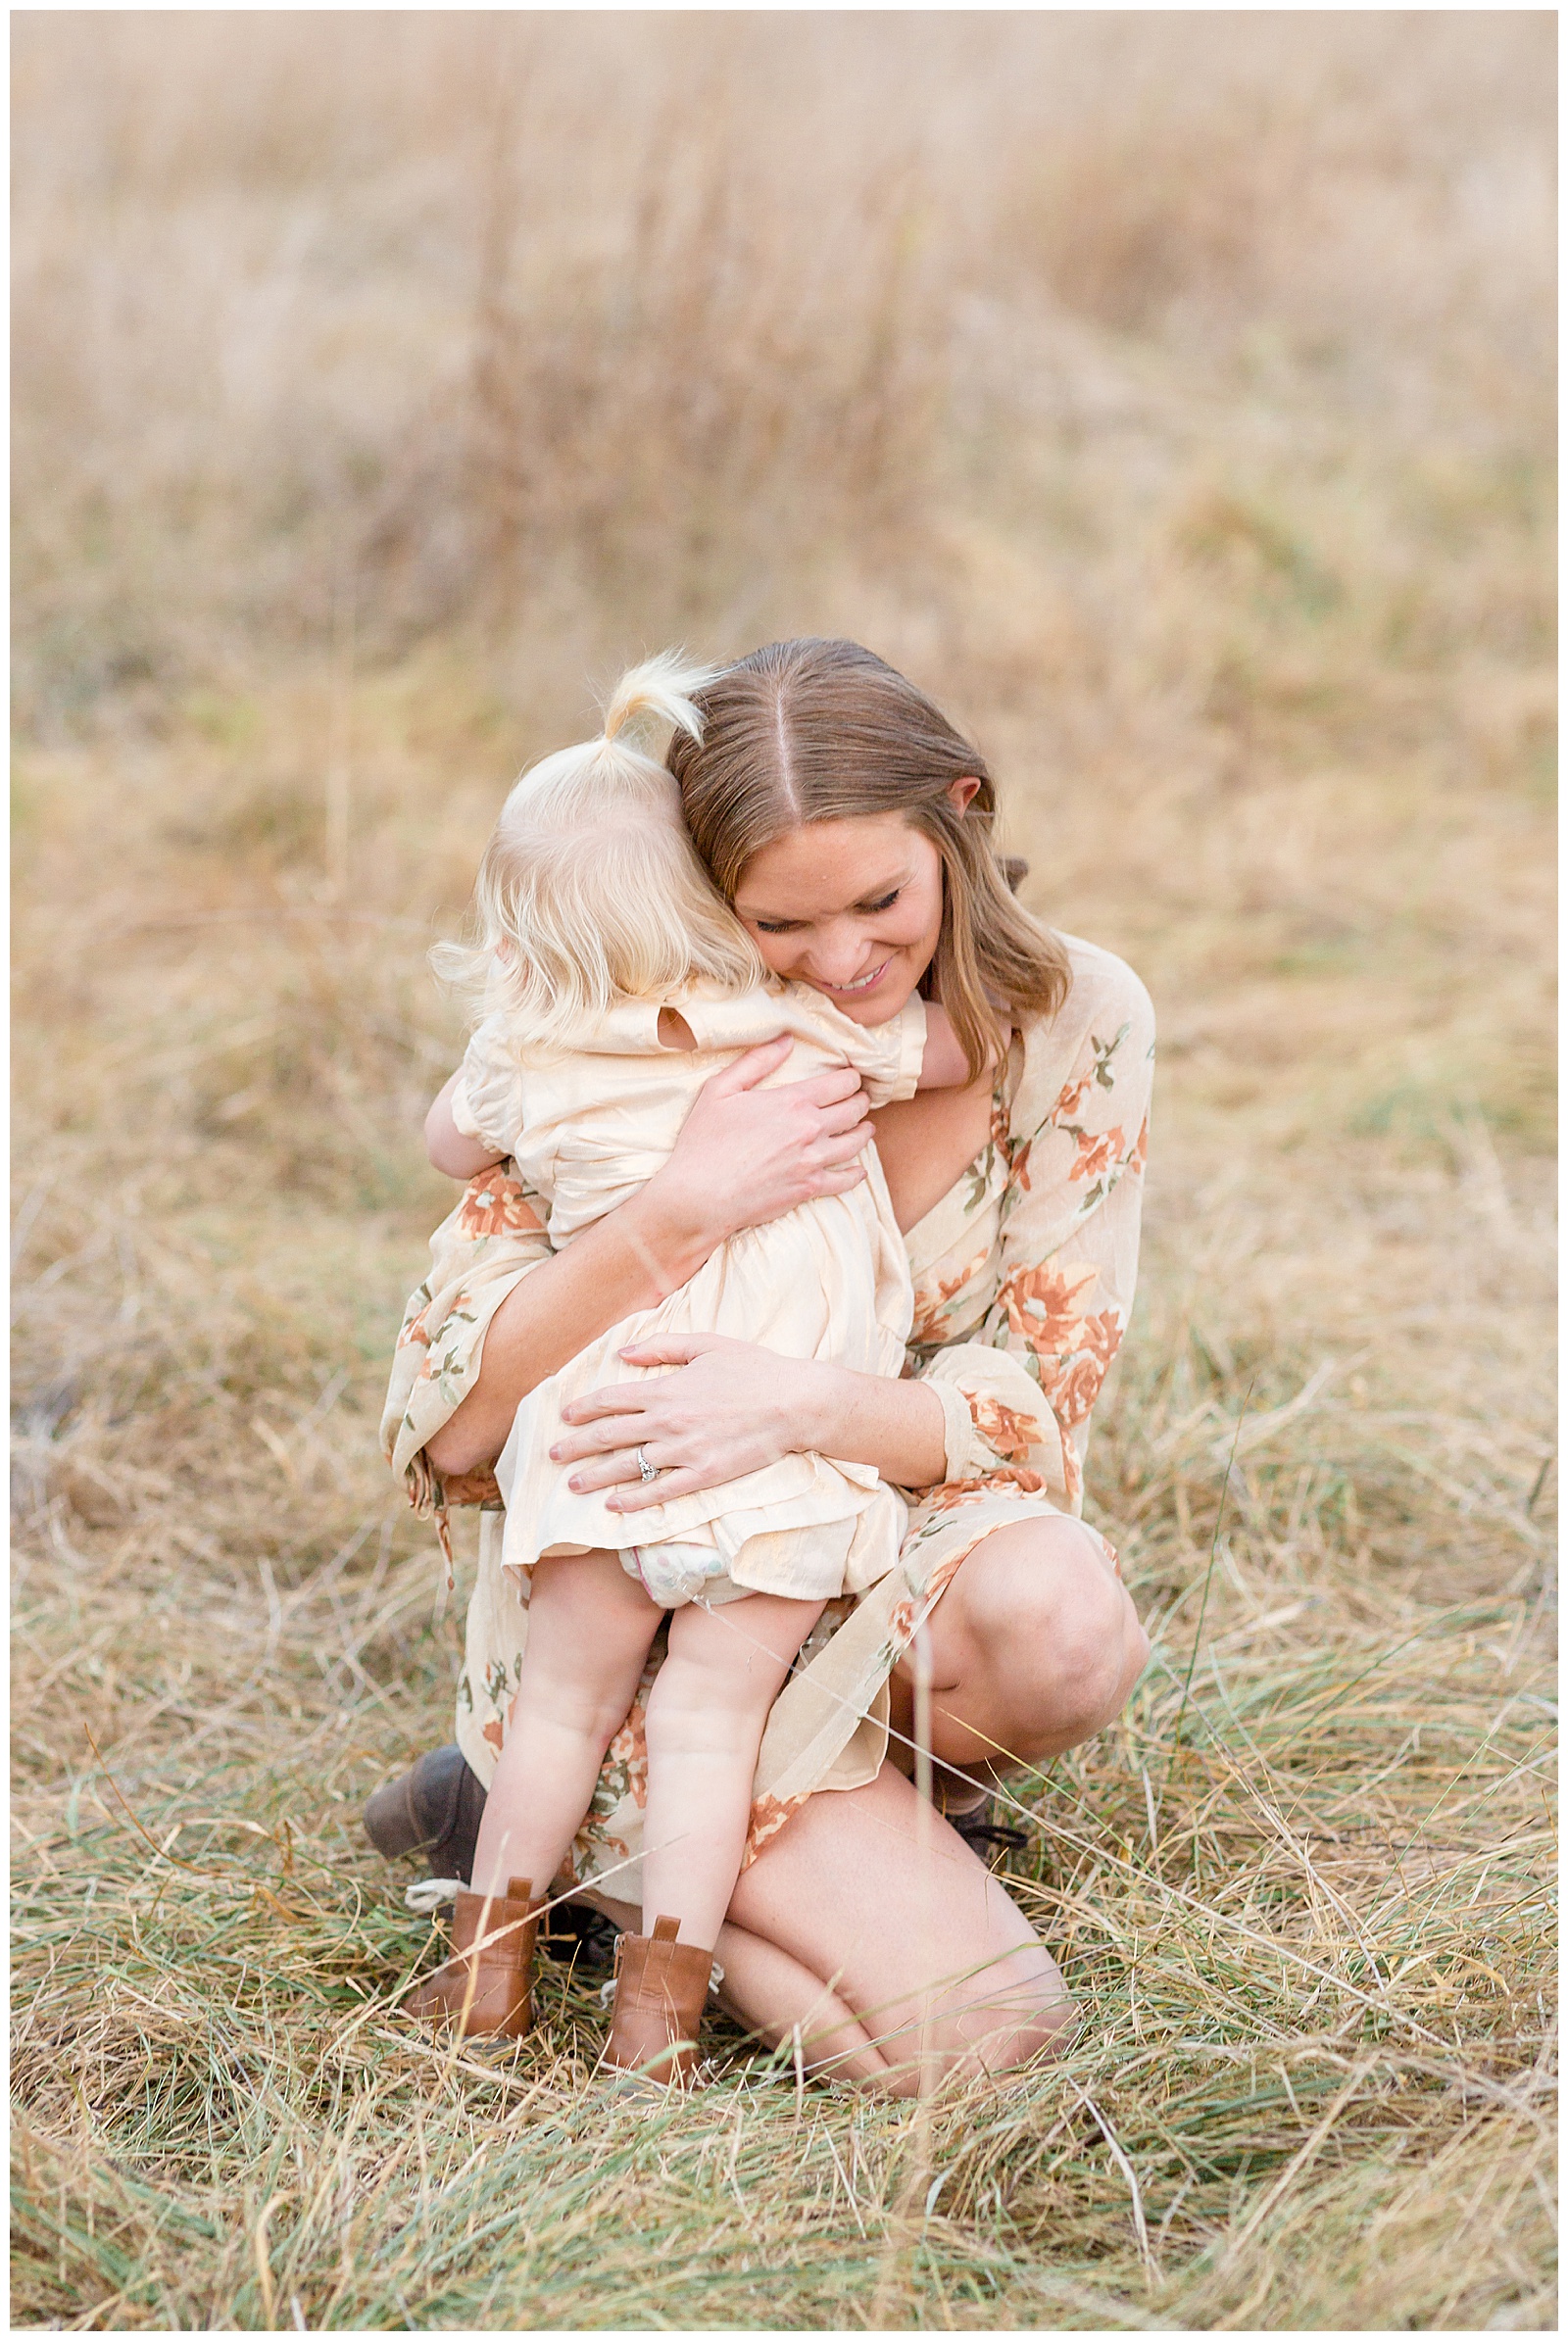 Mom bends down with her cream floral dress and hugs her toddler daughter tightly during their Nashville family session with Rebecca Rice.